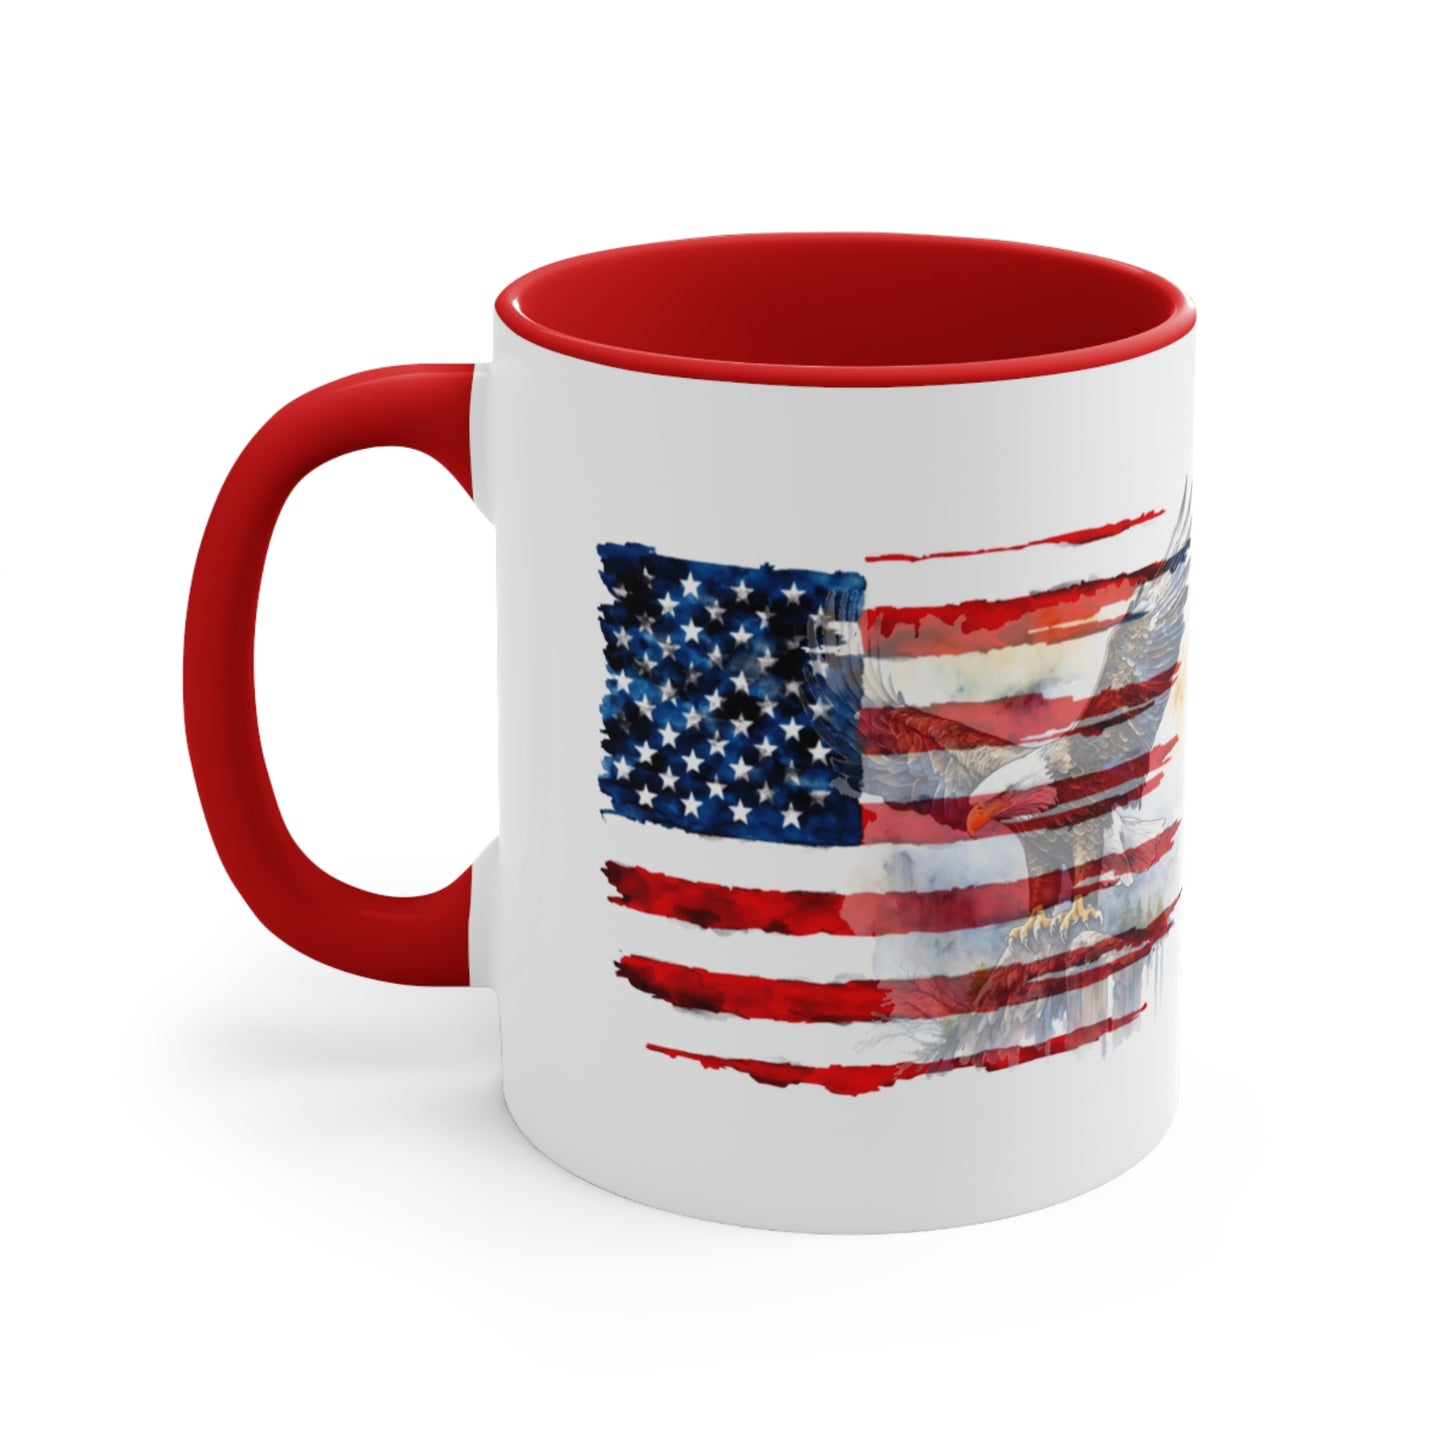 Coffee Mug with US Flag and eagle 11 oz, back view in red.